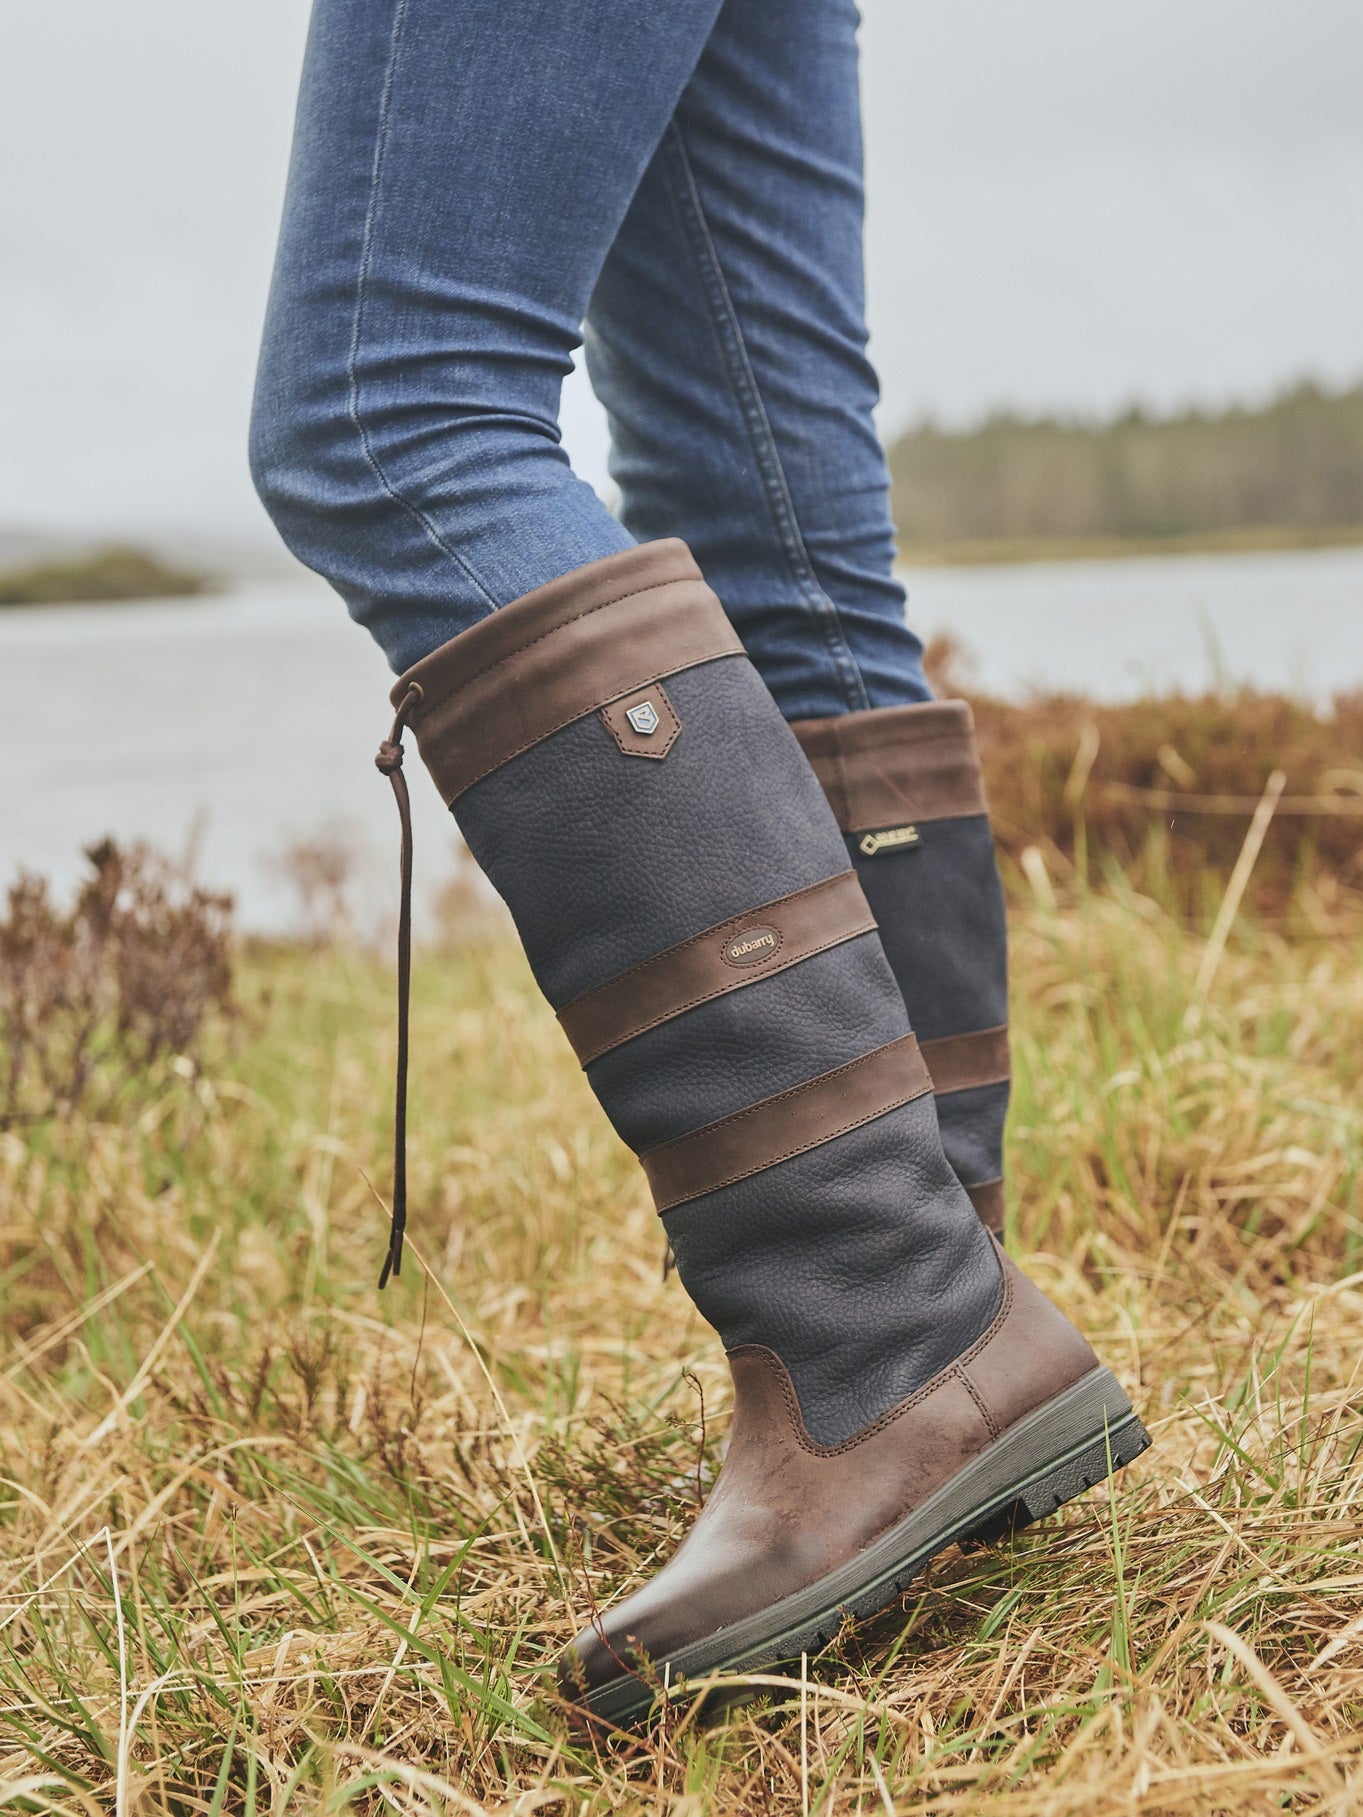 Dubarry Boots & Clothing – A Farley